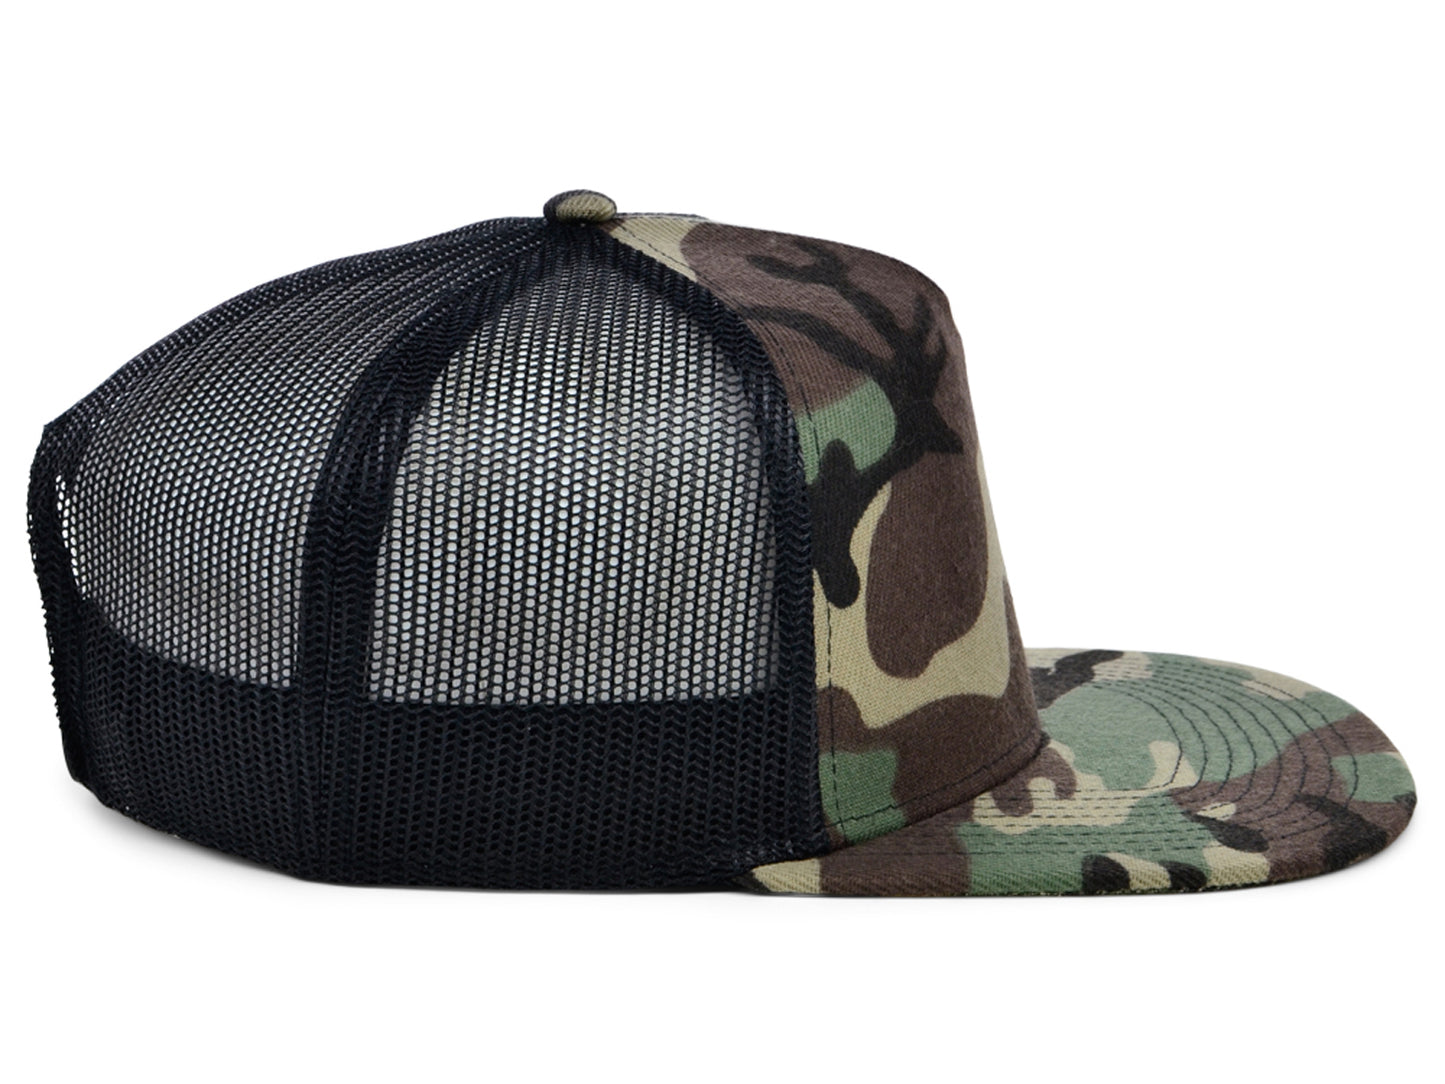 Crowns by Lids Essential 5-Panel Trucker - Camo